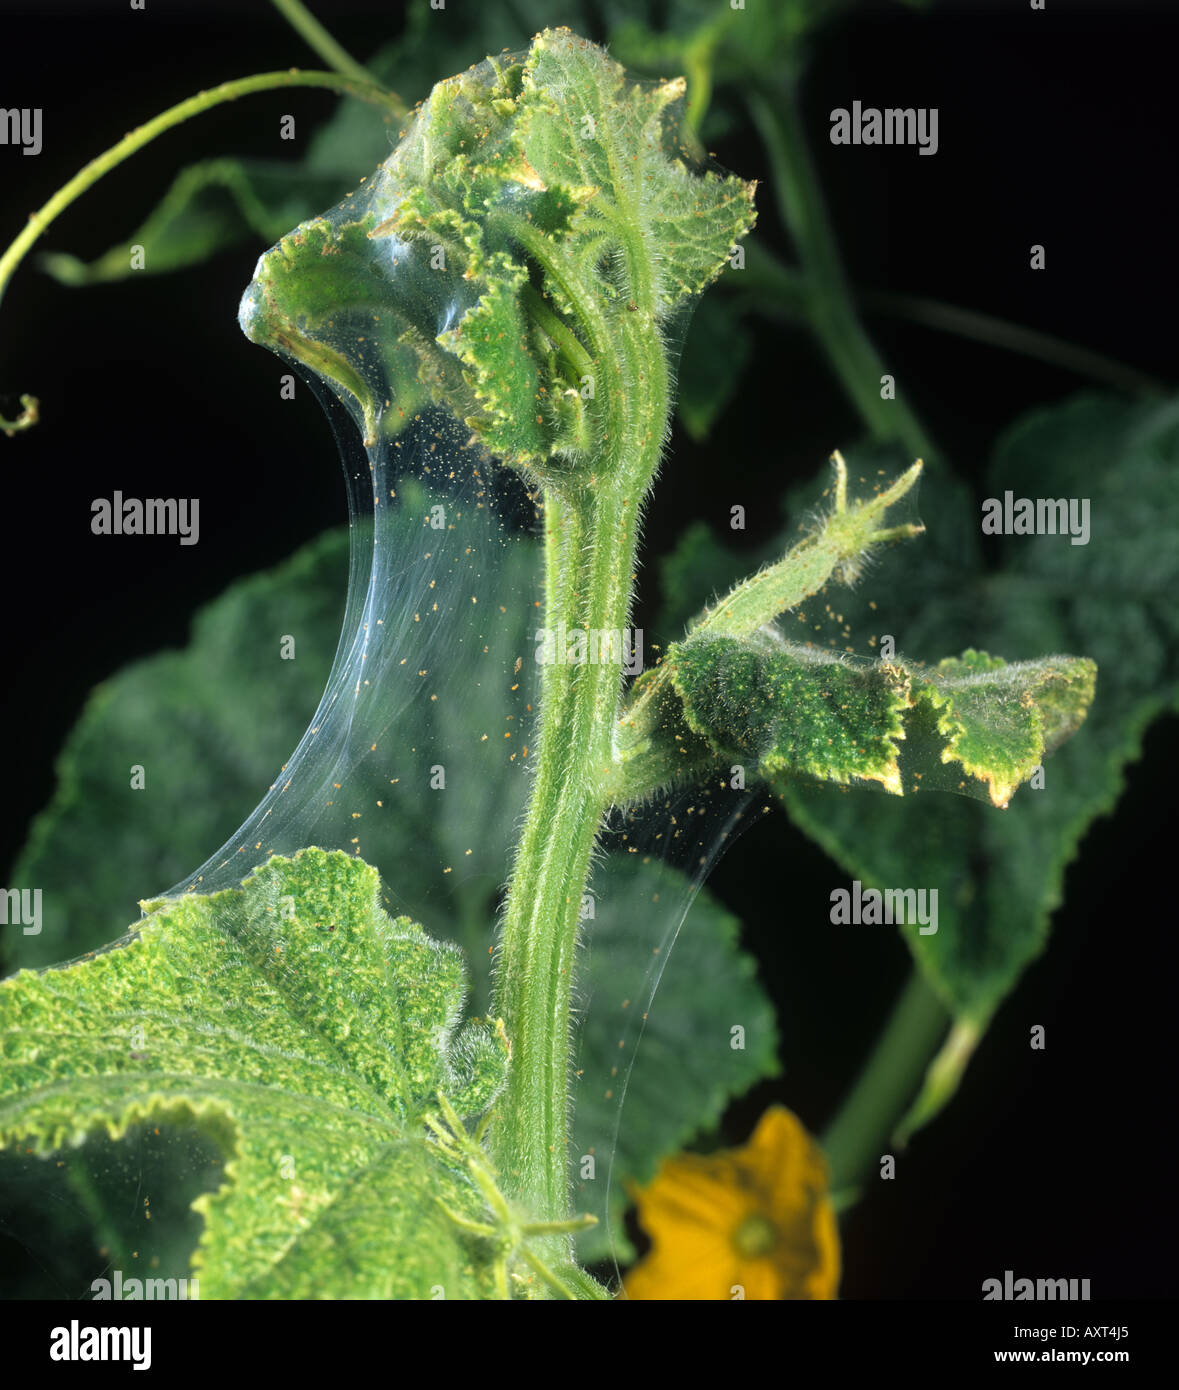 Stringing feeding damage of two spotted spider mites Tetranychus urticae on cucumber leaves Stock Photo